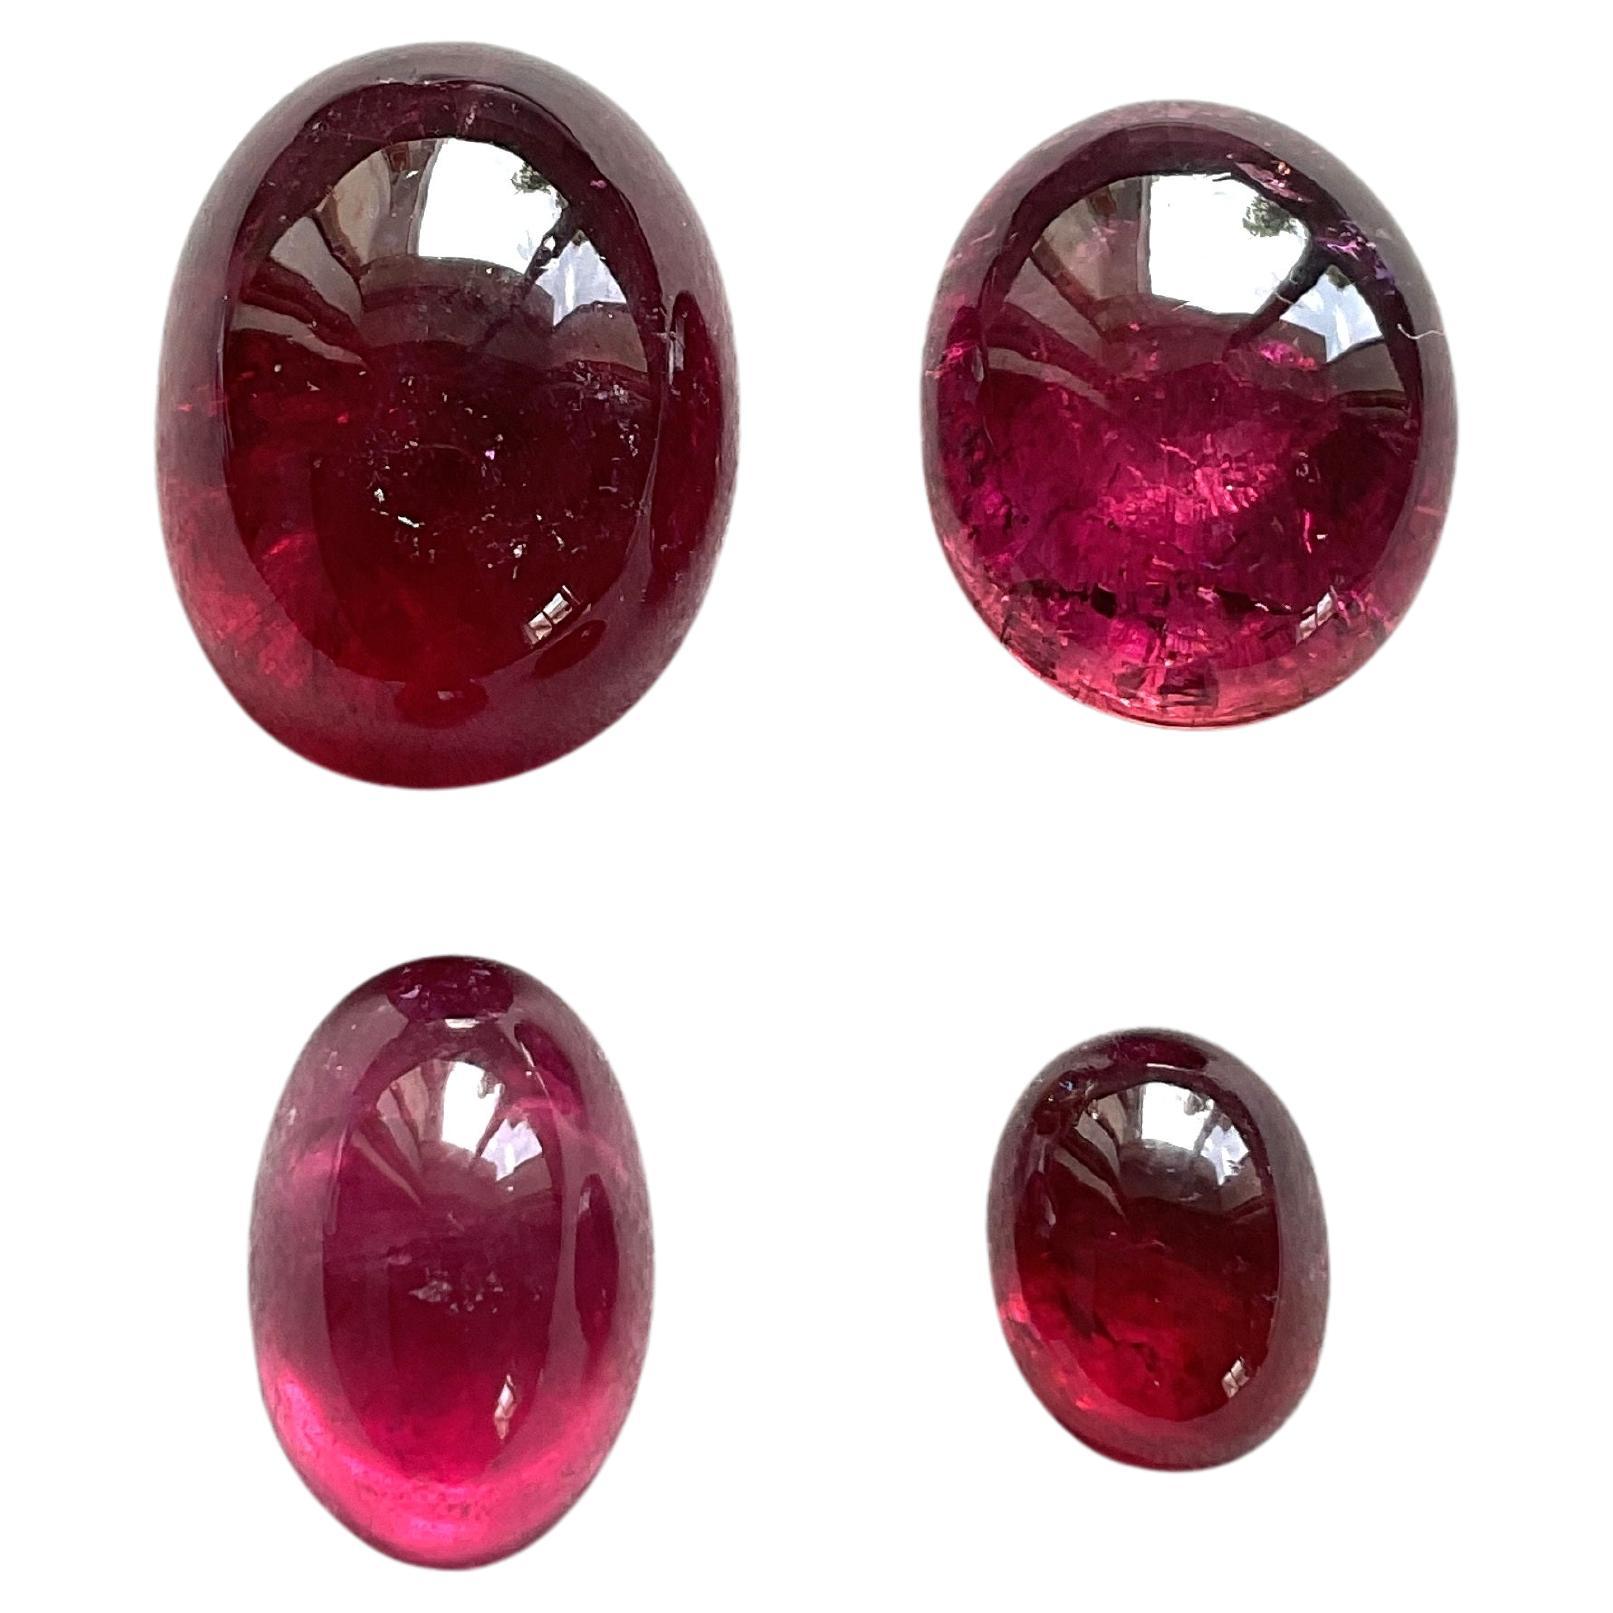 92.86 Carats Top Quality Rubellite Tourmaline Cabochon 4 Pieces Natural Gemstone